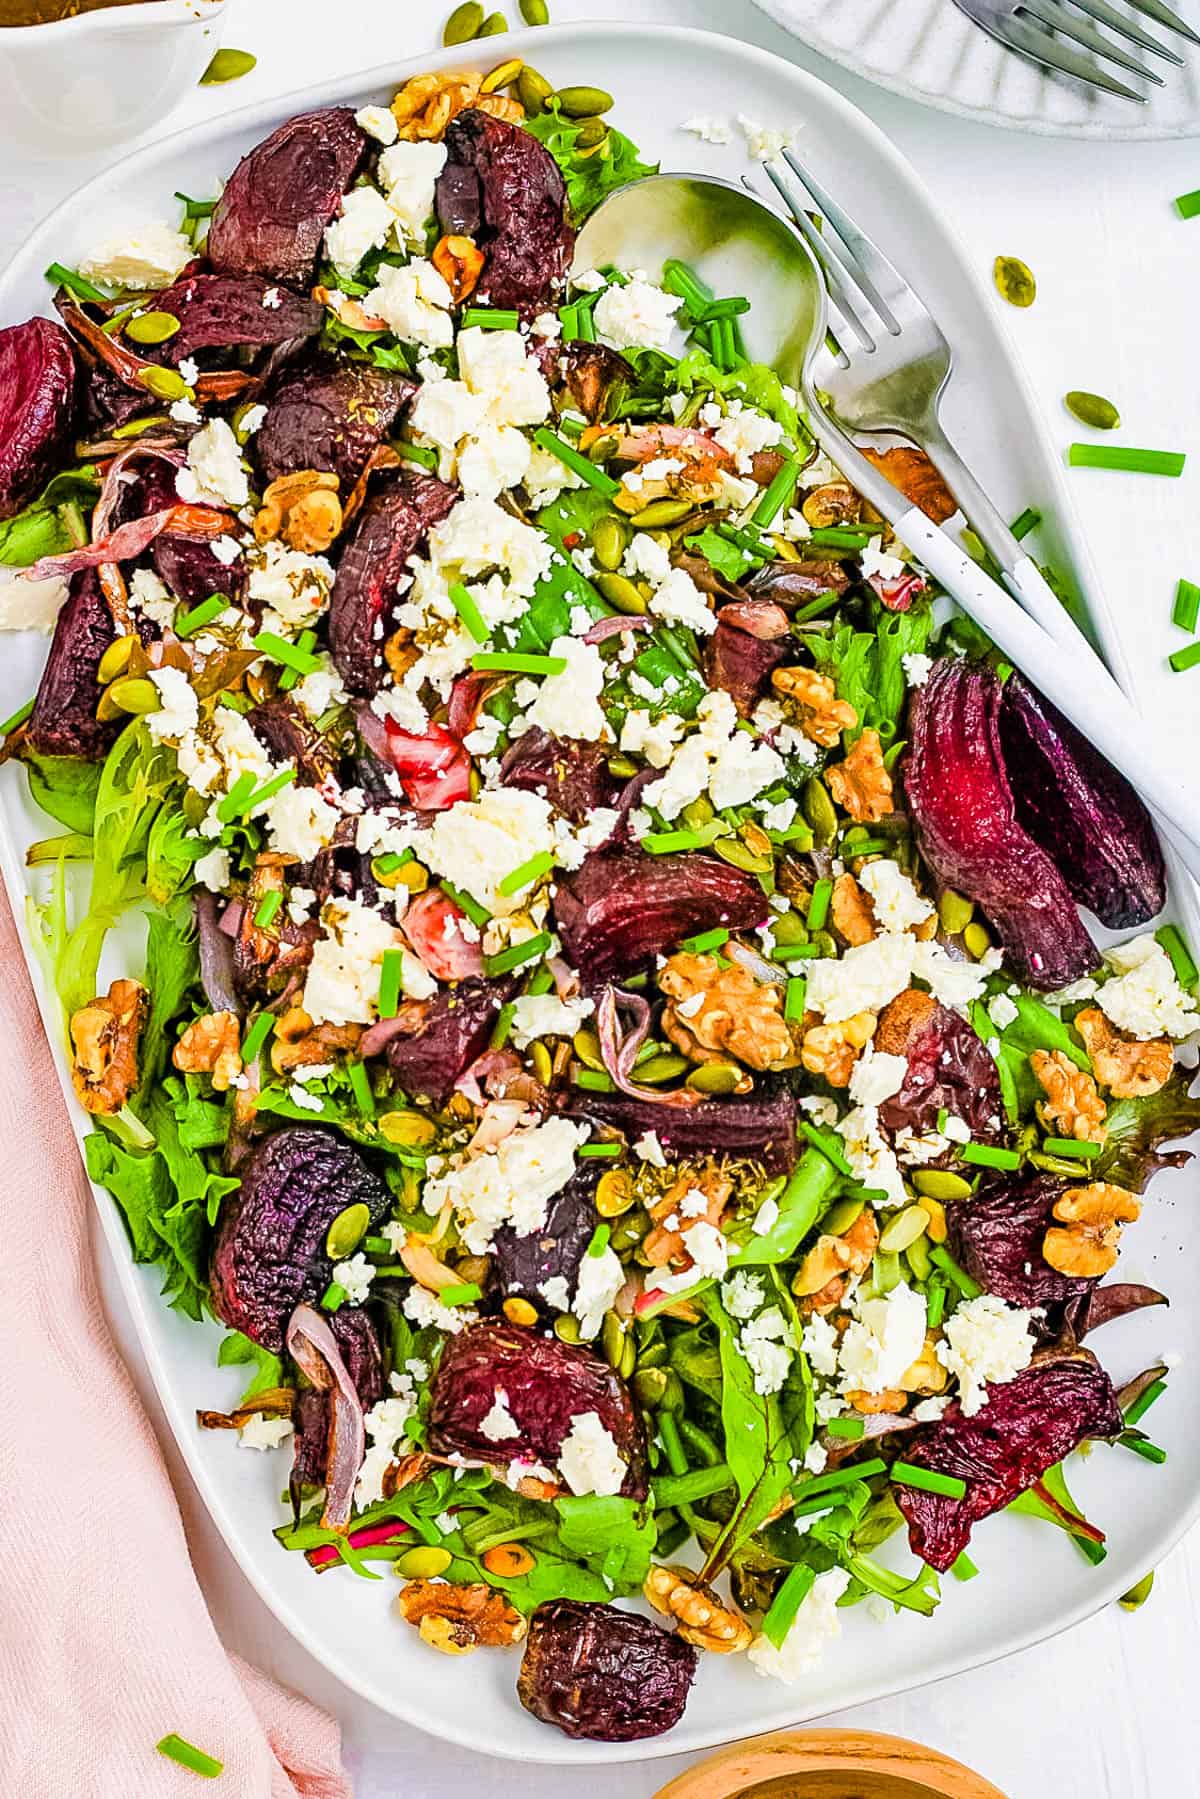 Roasted beetroot and feta salad with walnuts and mixed greens, served on a large white serving platter.